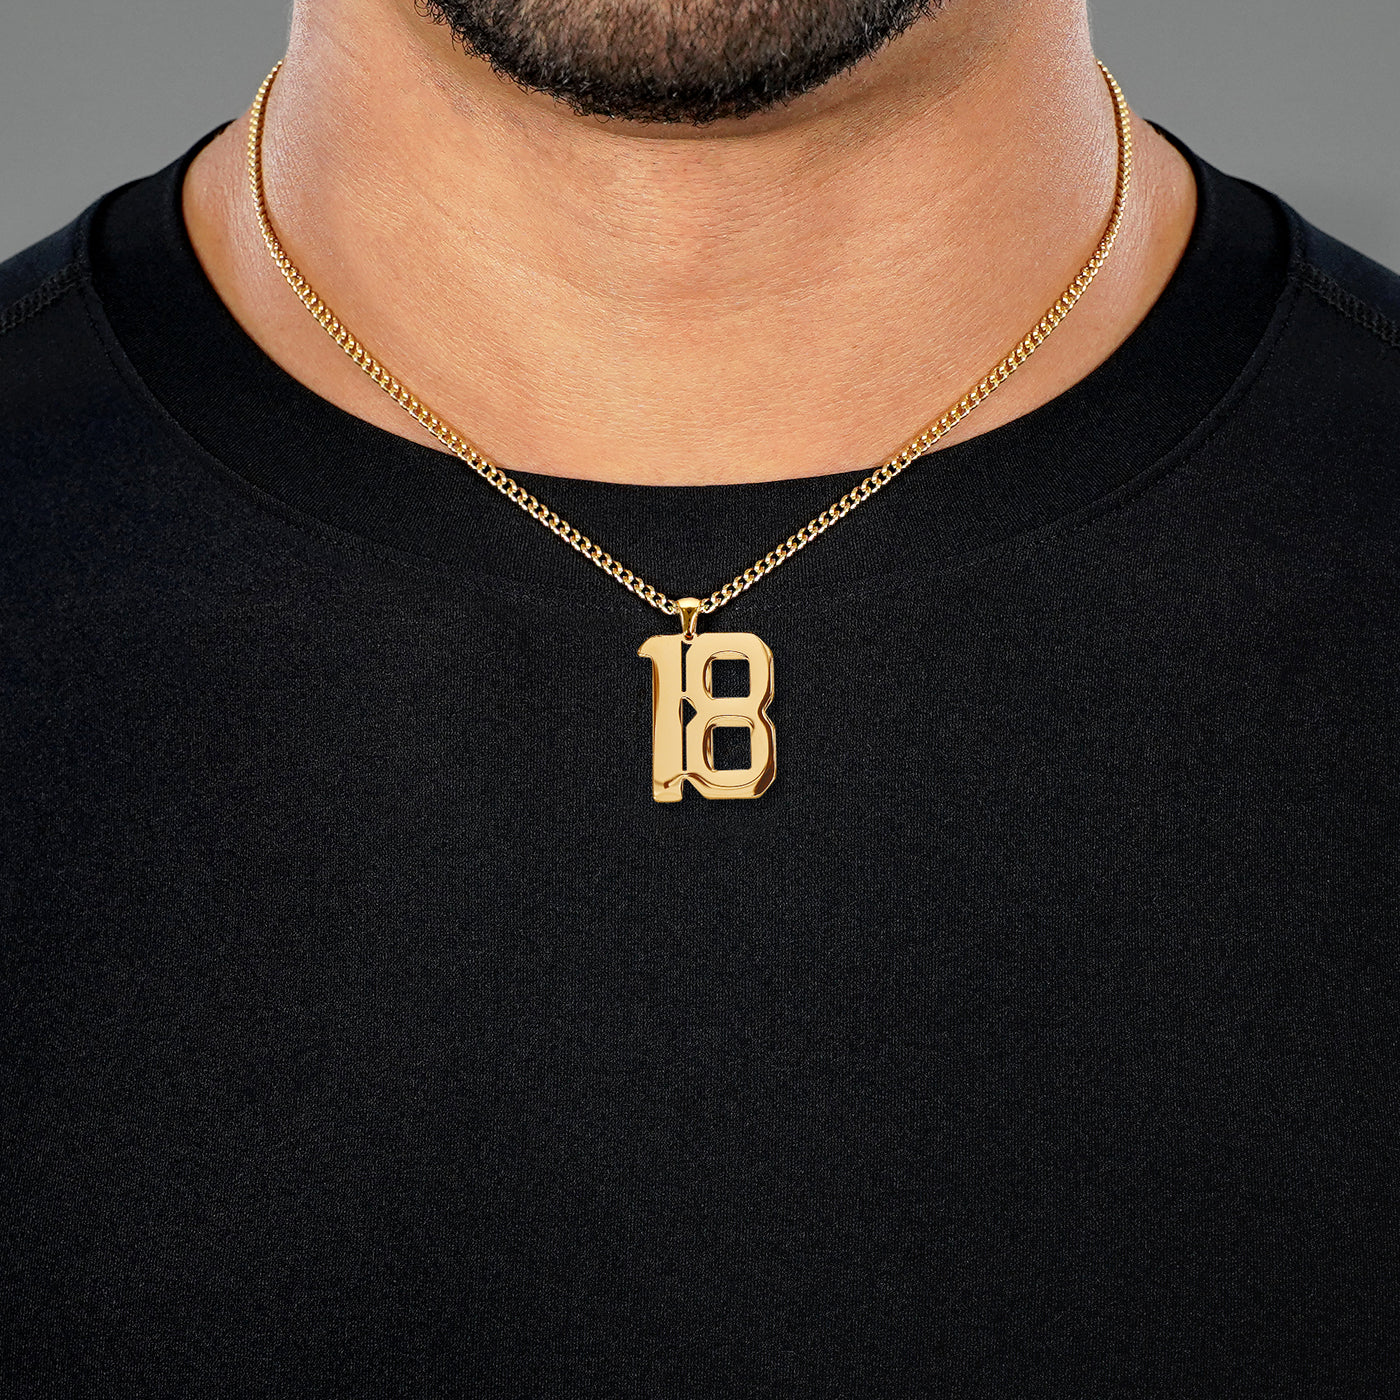 18 Number Pendant with Chain Necklace - Gold Plated Stainless Steel